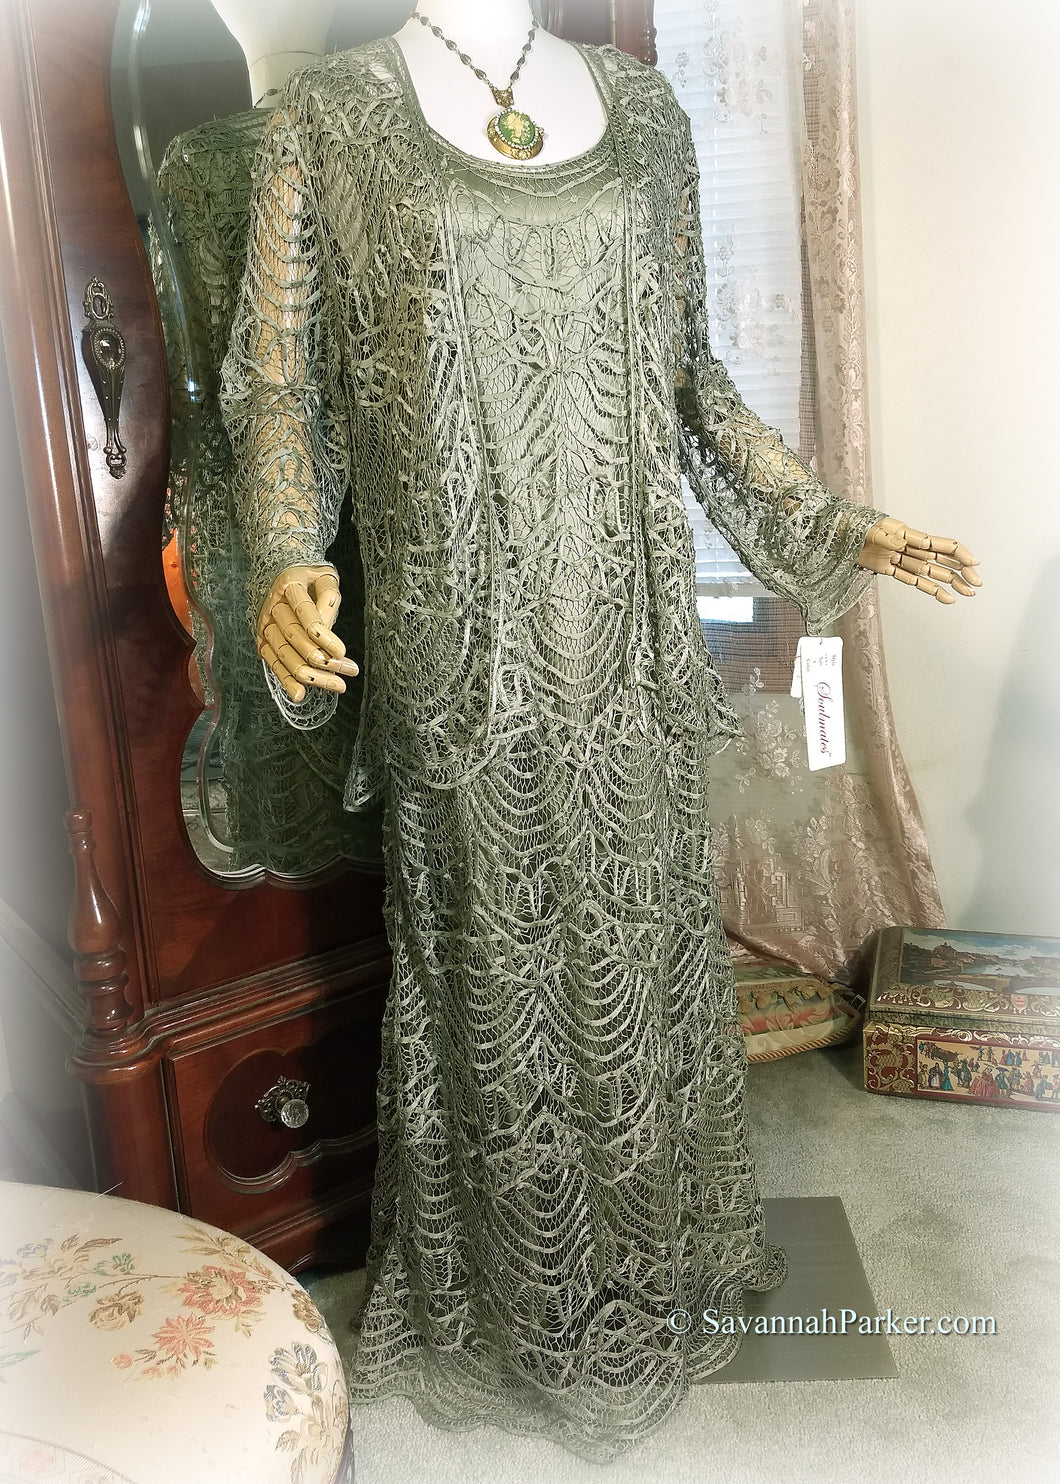 SOLD Amazing Vintage NEW with Tags All Silk Beaded Handmade Battenburg-style Lace Dress, Jacket and Slip - Gorgeous Sage Green Silk Satin - Silk Satin Slip